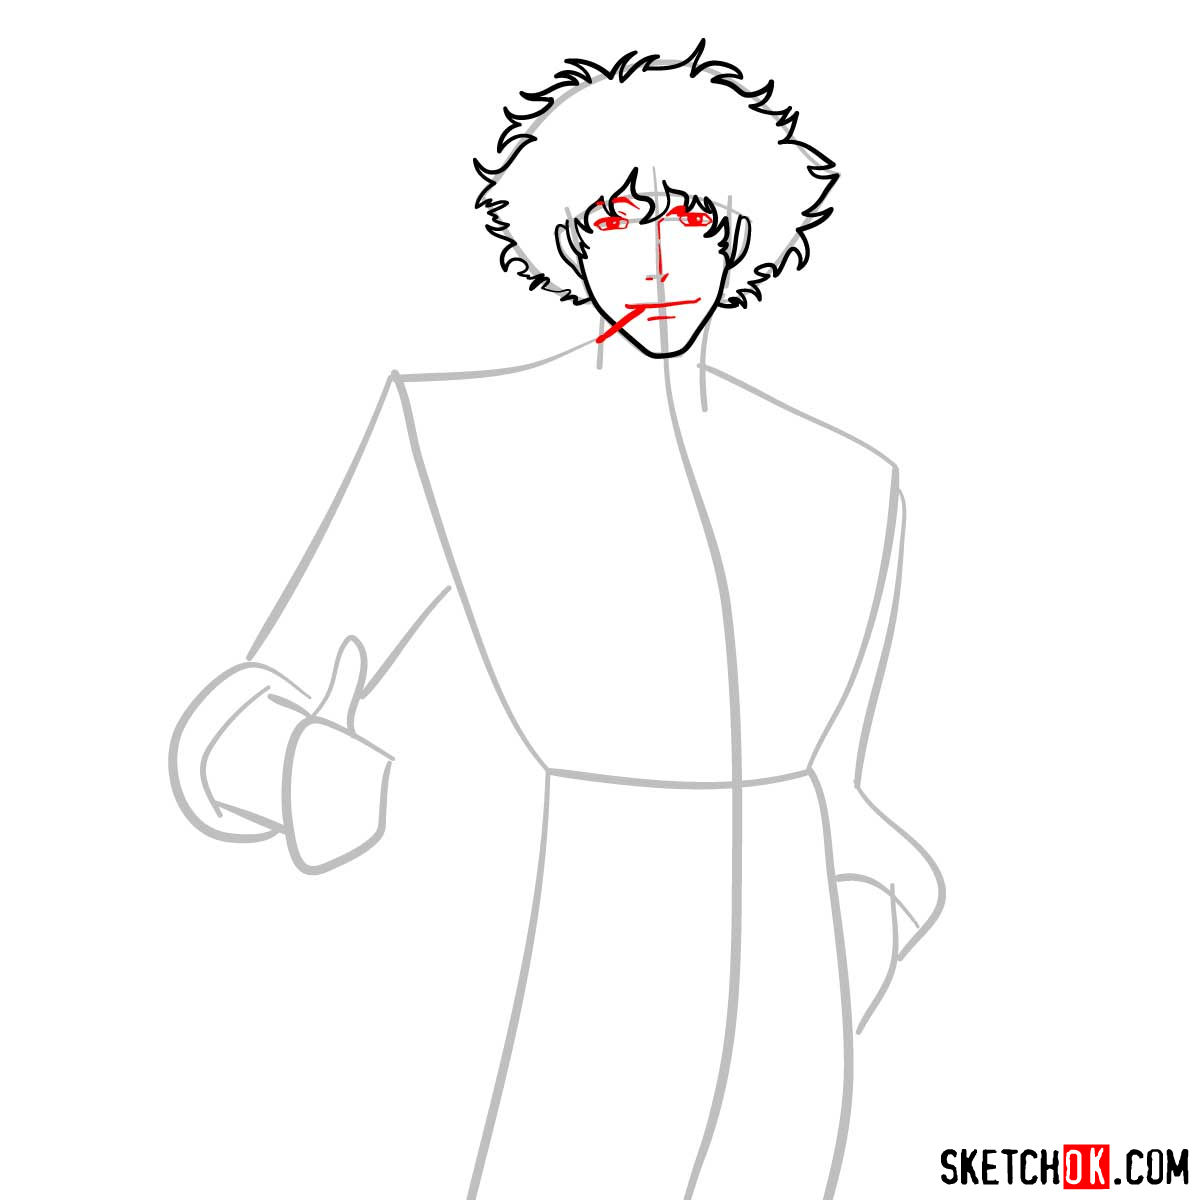 How to draw Spike Spiegel from Cowboy Bebop anime - step 05